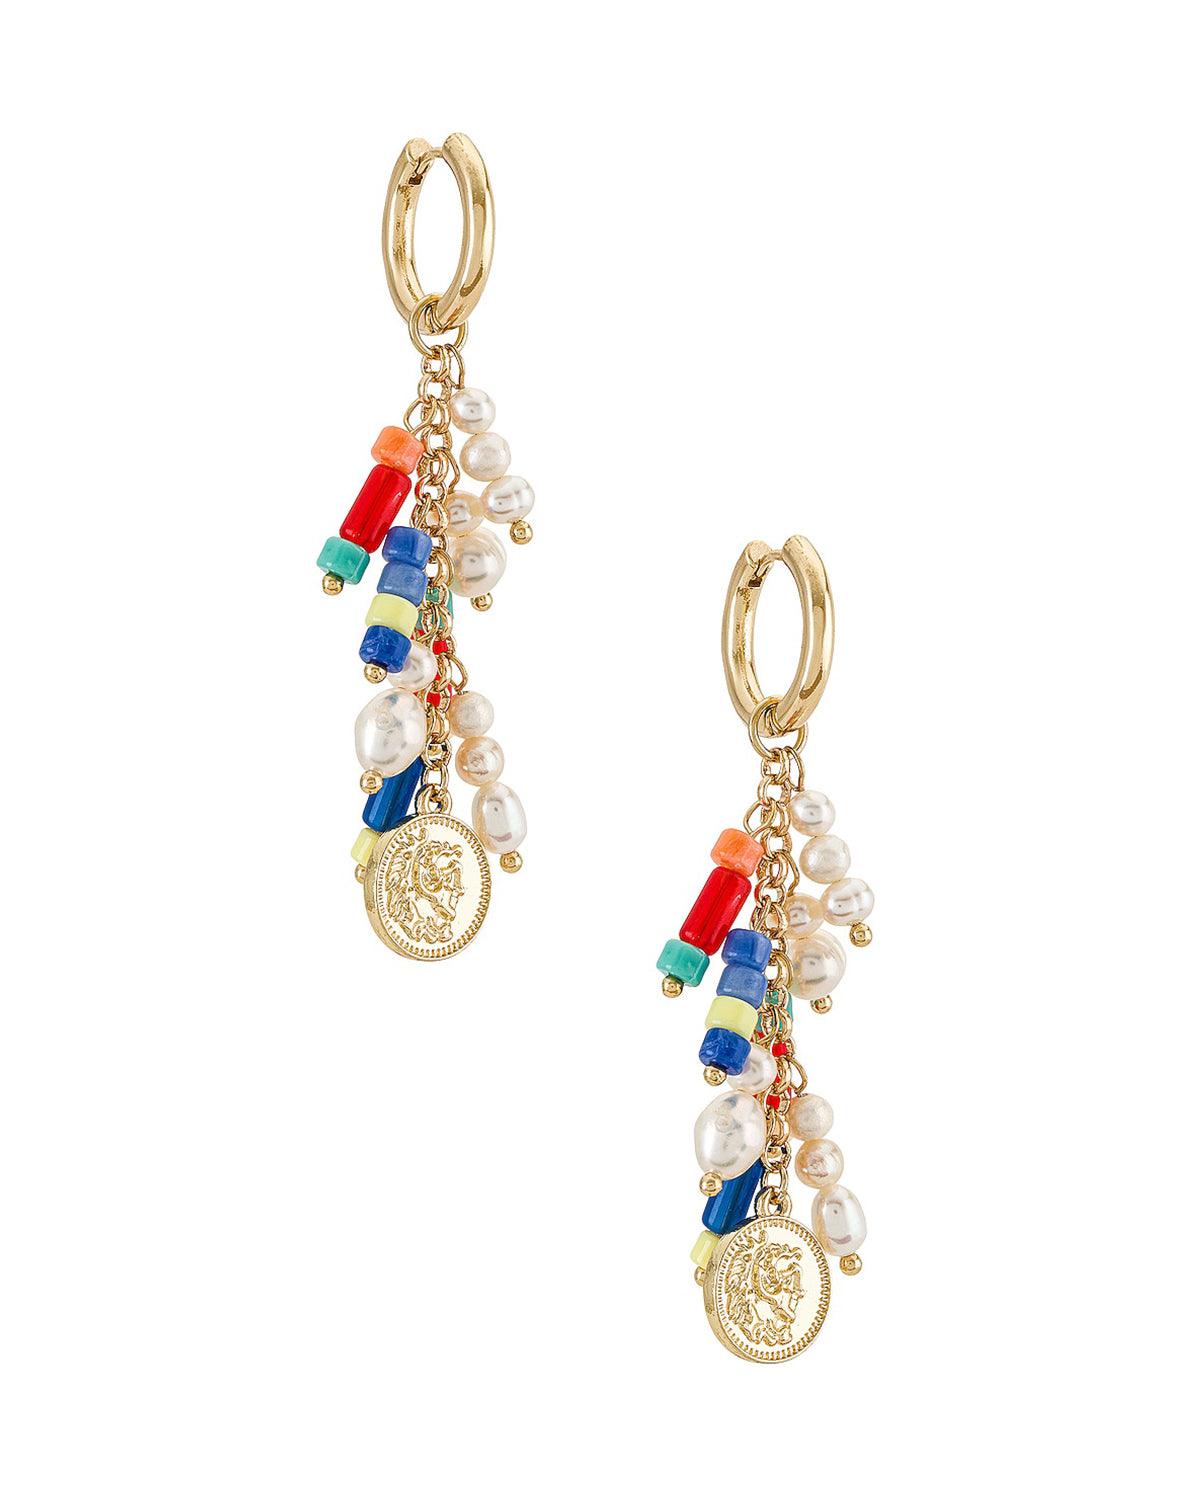 14k gold plated earrings with acrylic pearls and colorful beaded accents. and coin charm. Earring has a hinge closure and measures 2.75 inches long. 